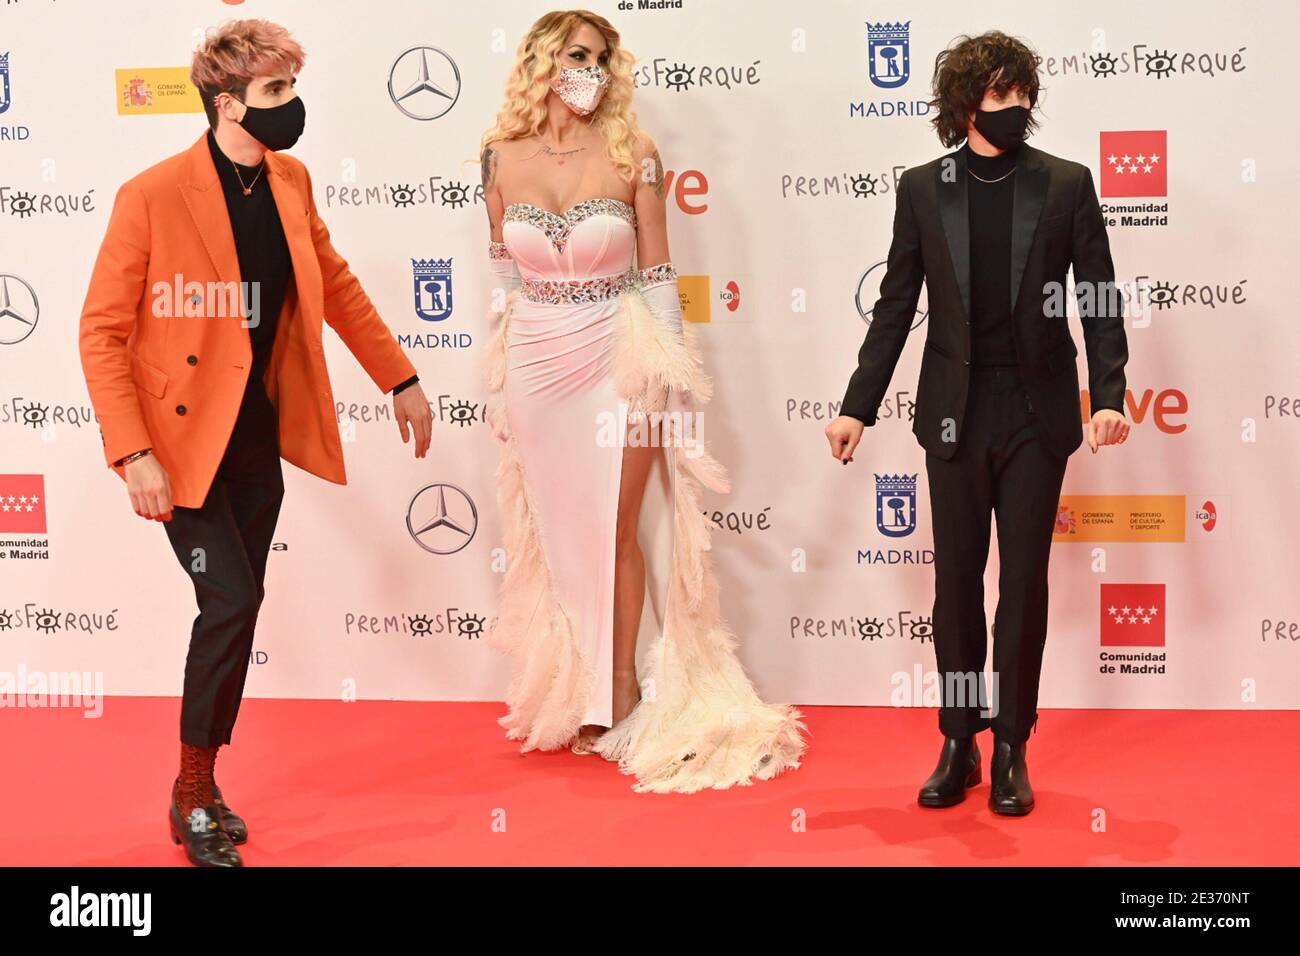 Madrid, Spain. 16th Jan, 2021. From left to rigth: Javier Calvo, Daniela Ortiz and Javier Ambrosi at photocall for the 26th annual Jose Maria Forque Awards in Madrid on Saturday, 16 January, 2021. Credit: CORDON PRESS/Alamy Live News Stock Photo